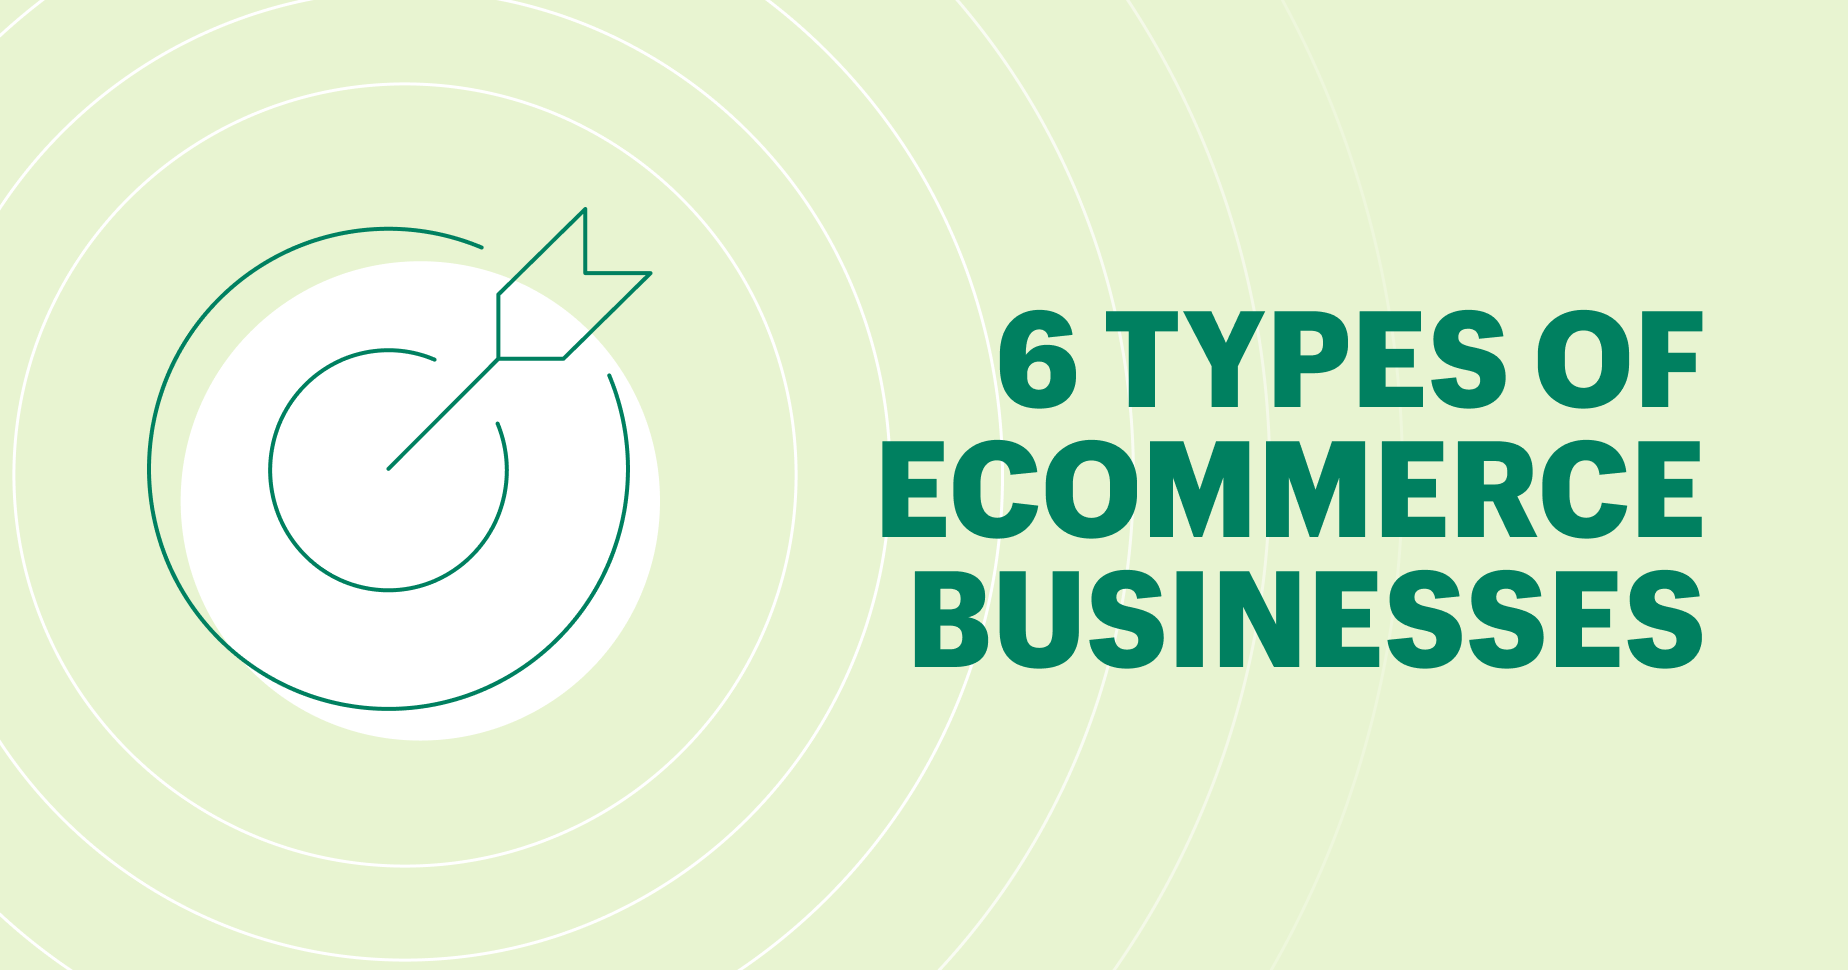 https://cdn.shopify.com/s/files/1/0070/7032/files/6_Types_of_Ecommerce_Businesses_and_Their_Pros_Cons.png?v=1653345098